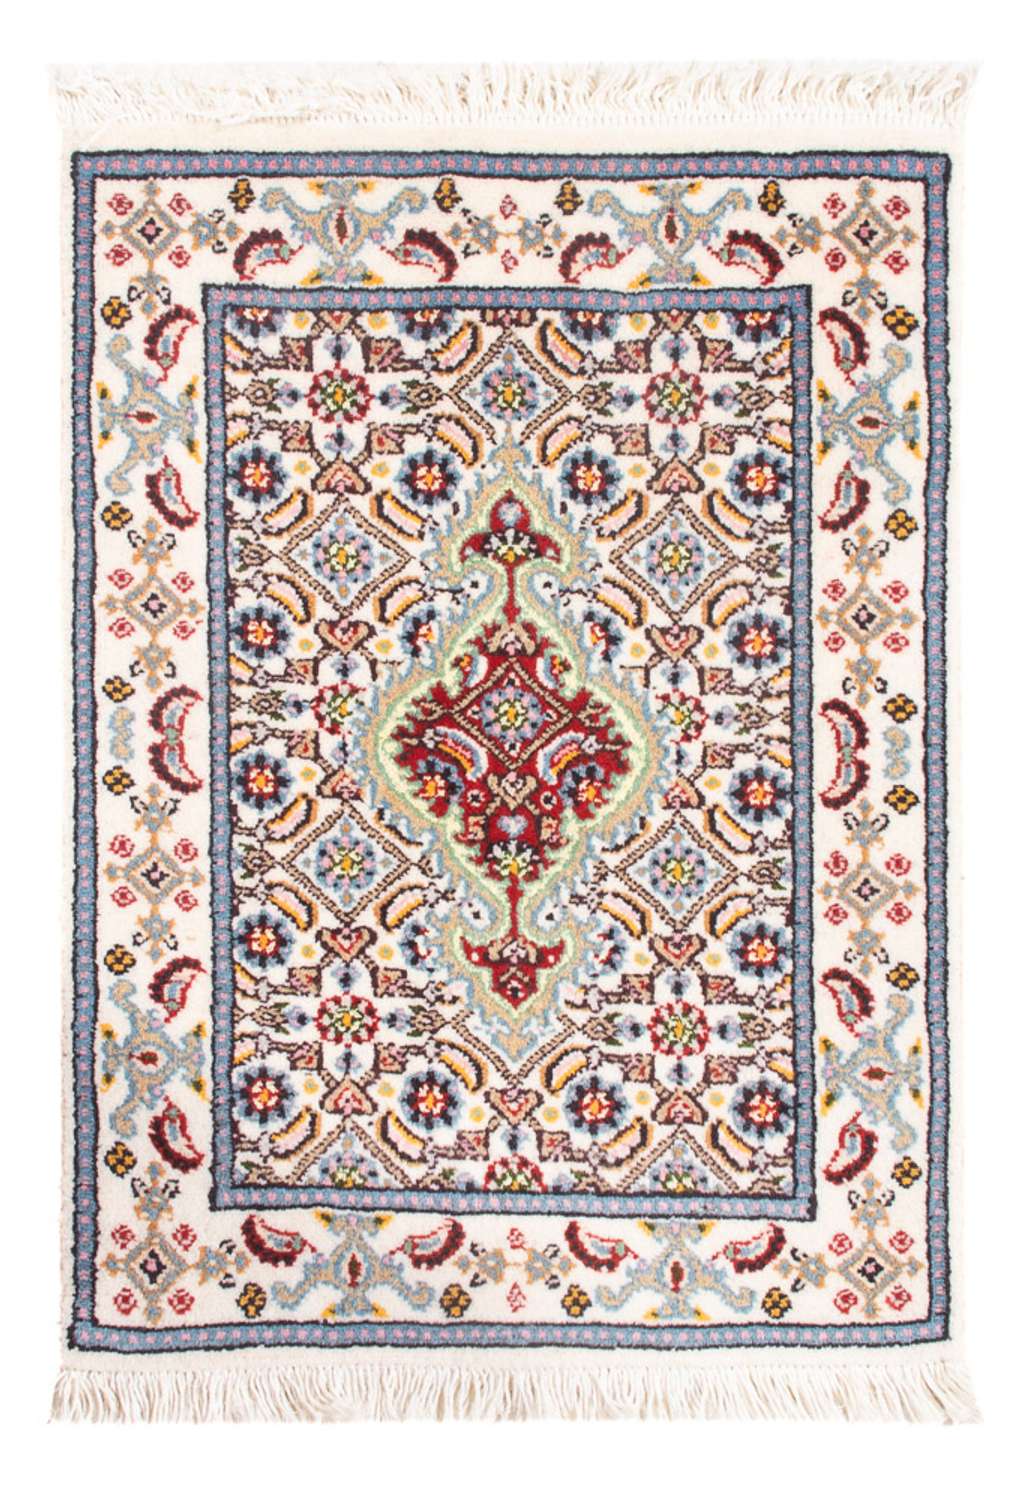 Perser Rug - Classic - Royal - 60 x 40 cm - multicolored